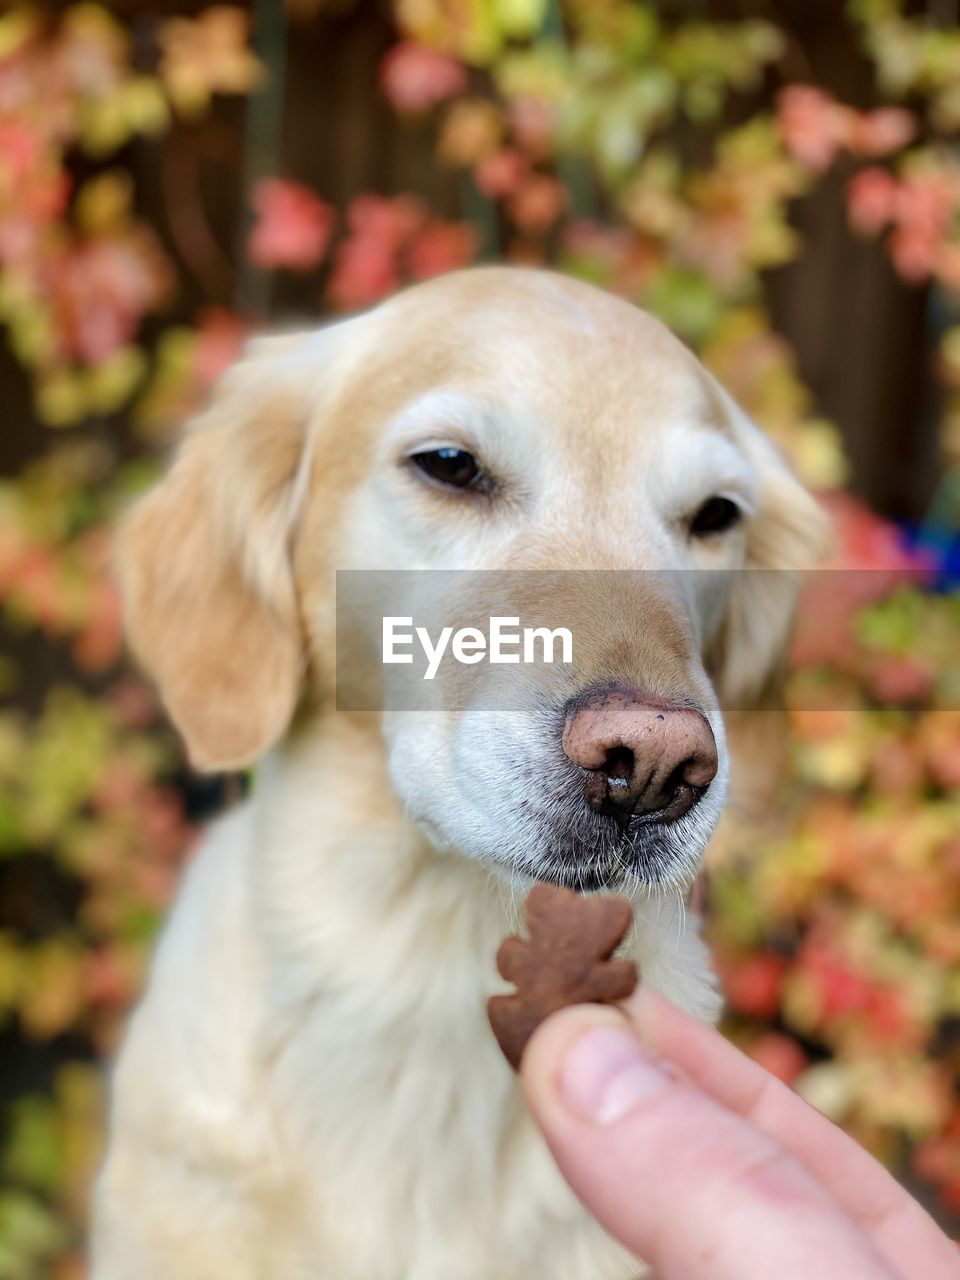 CLOSE-UP OF HAND HOLDING DOG AGAINST BLURRED BACKGROUND